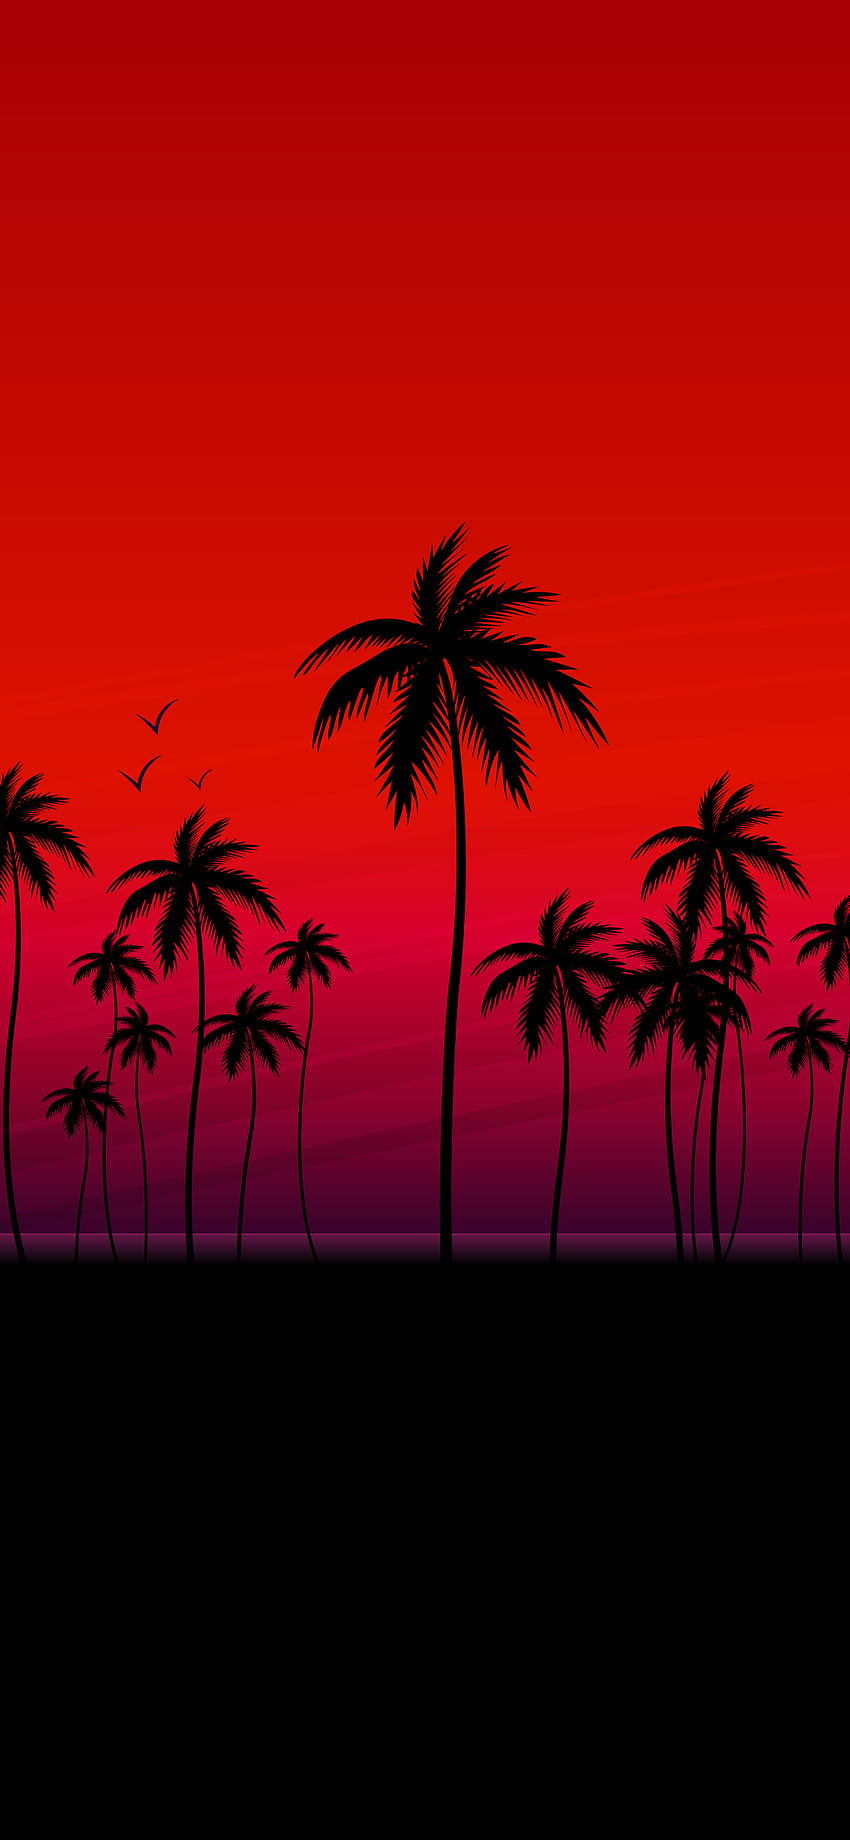 RED OLED PALMS AESTHETIC PHONE, mobile aesthetic HD phone wallpaper